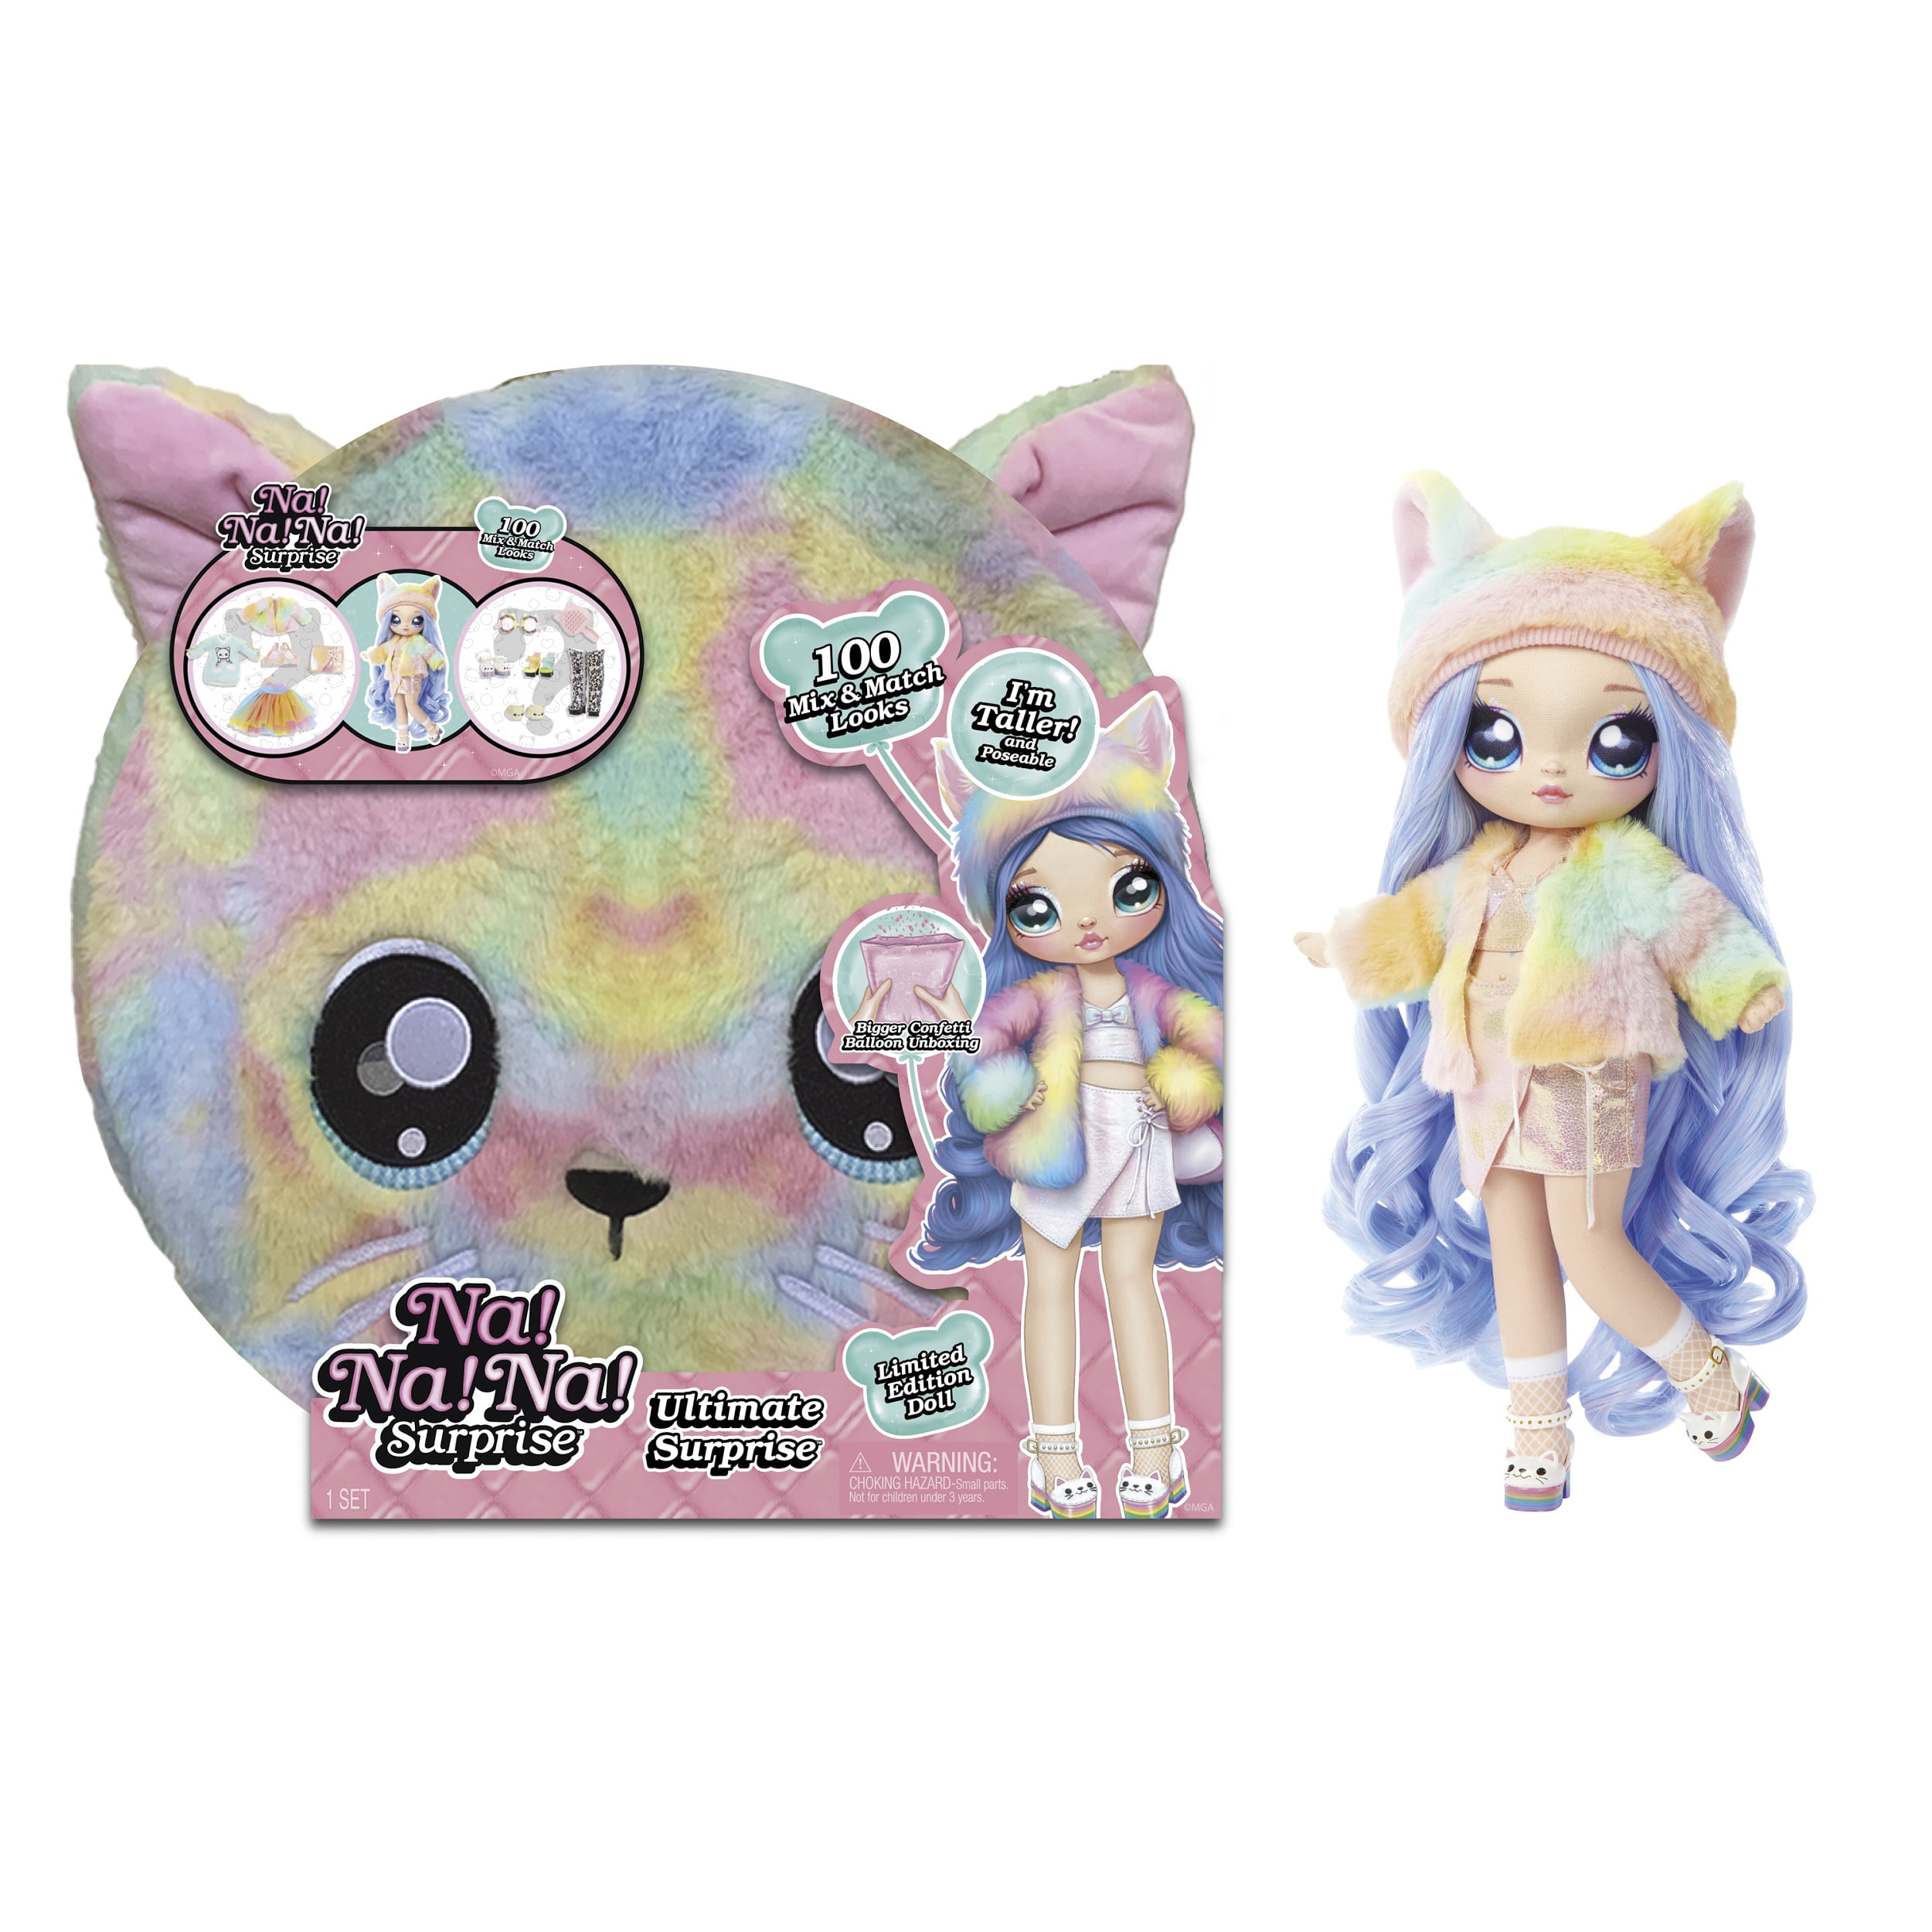 561149 for sale online Poopsie Glitter Unicorn 12inch Stardust Sparkle or Blingy Beauty Doll 